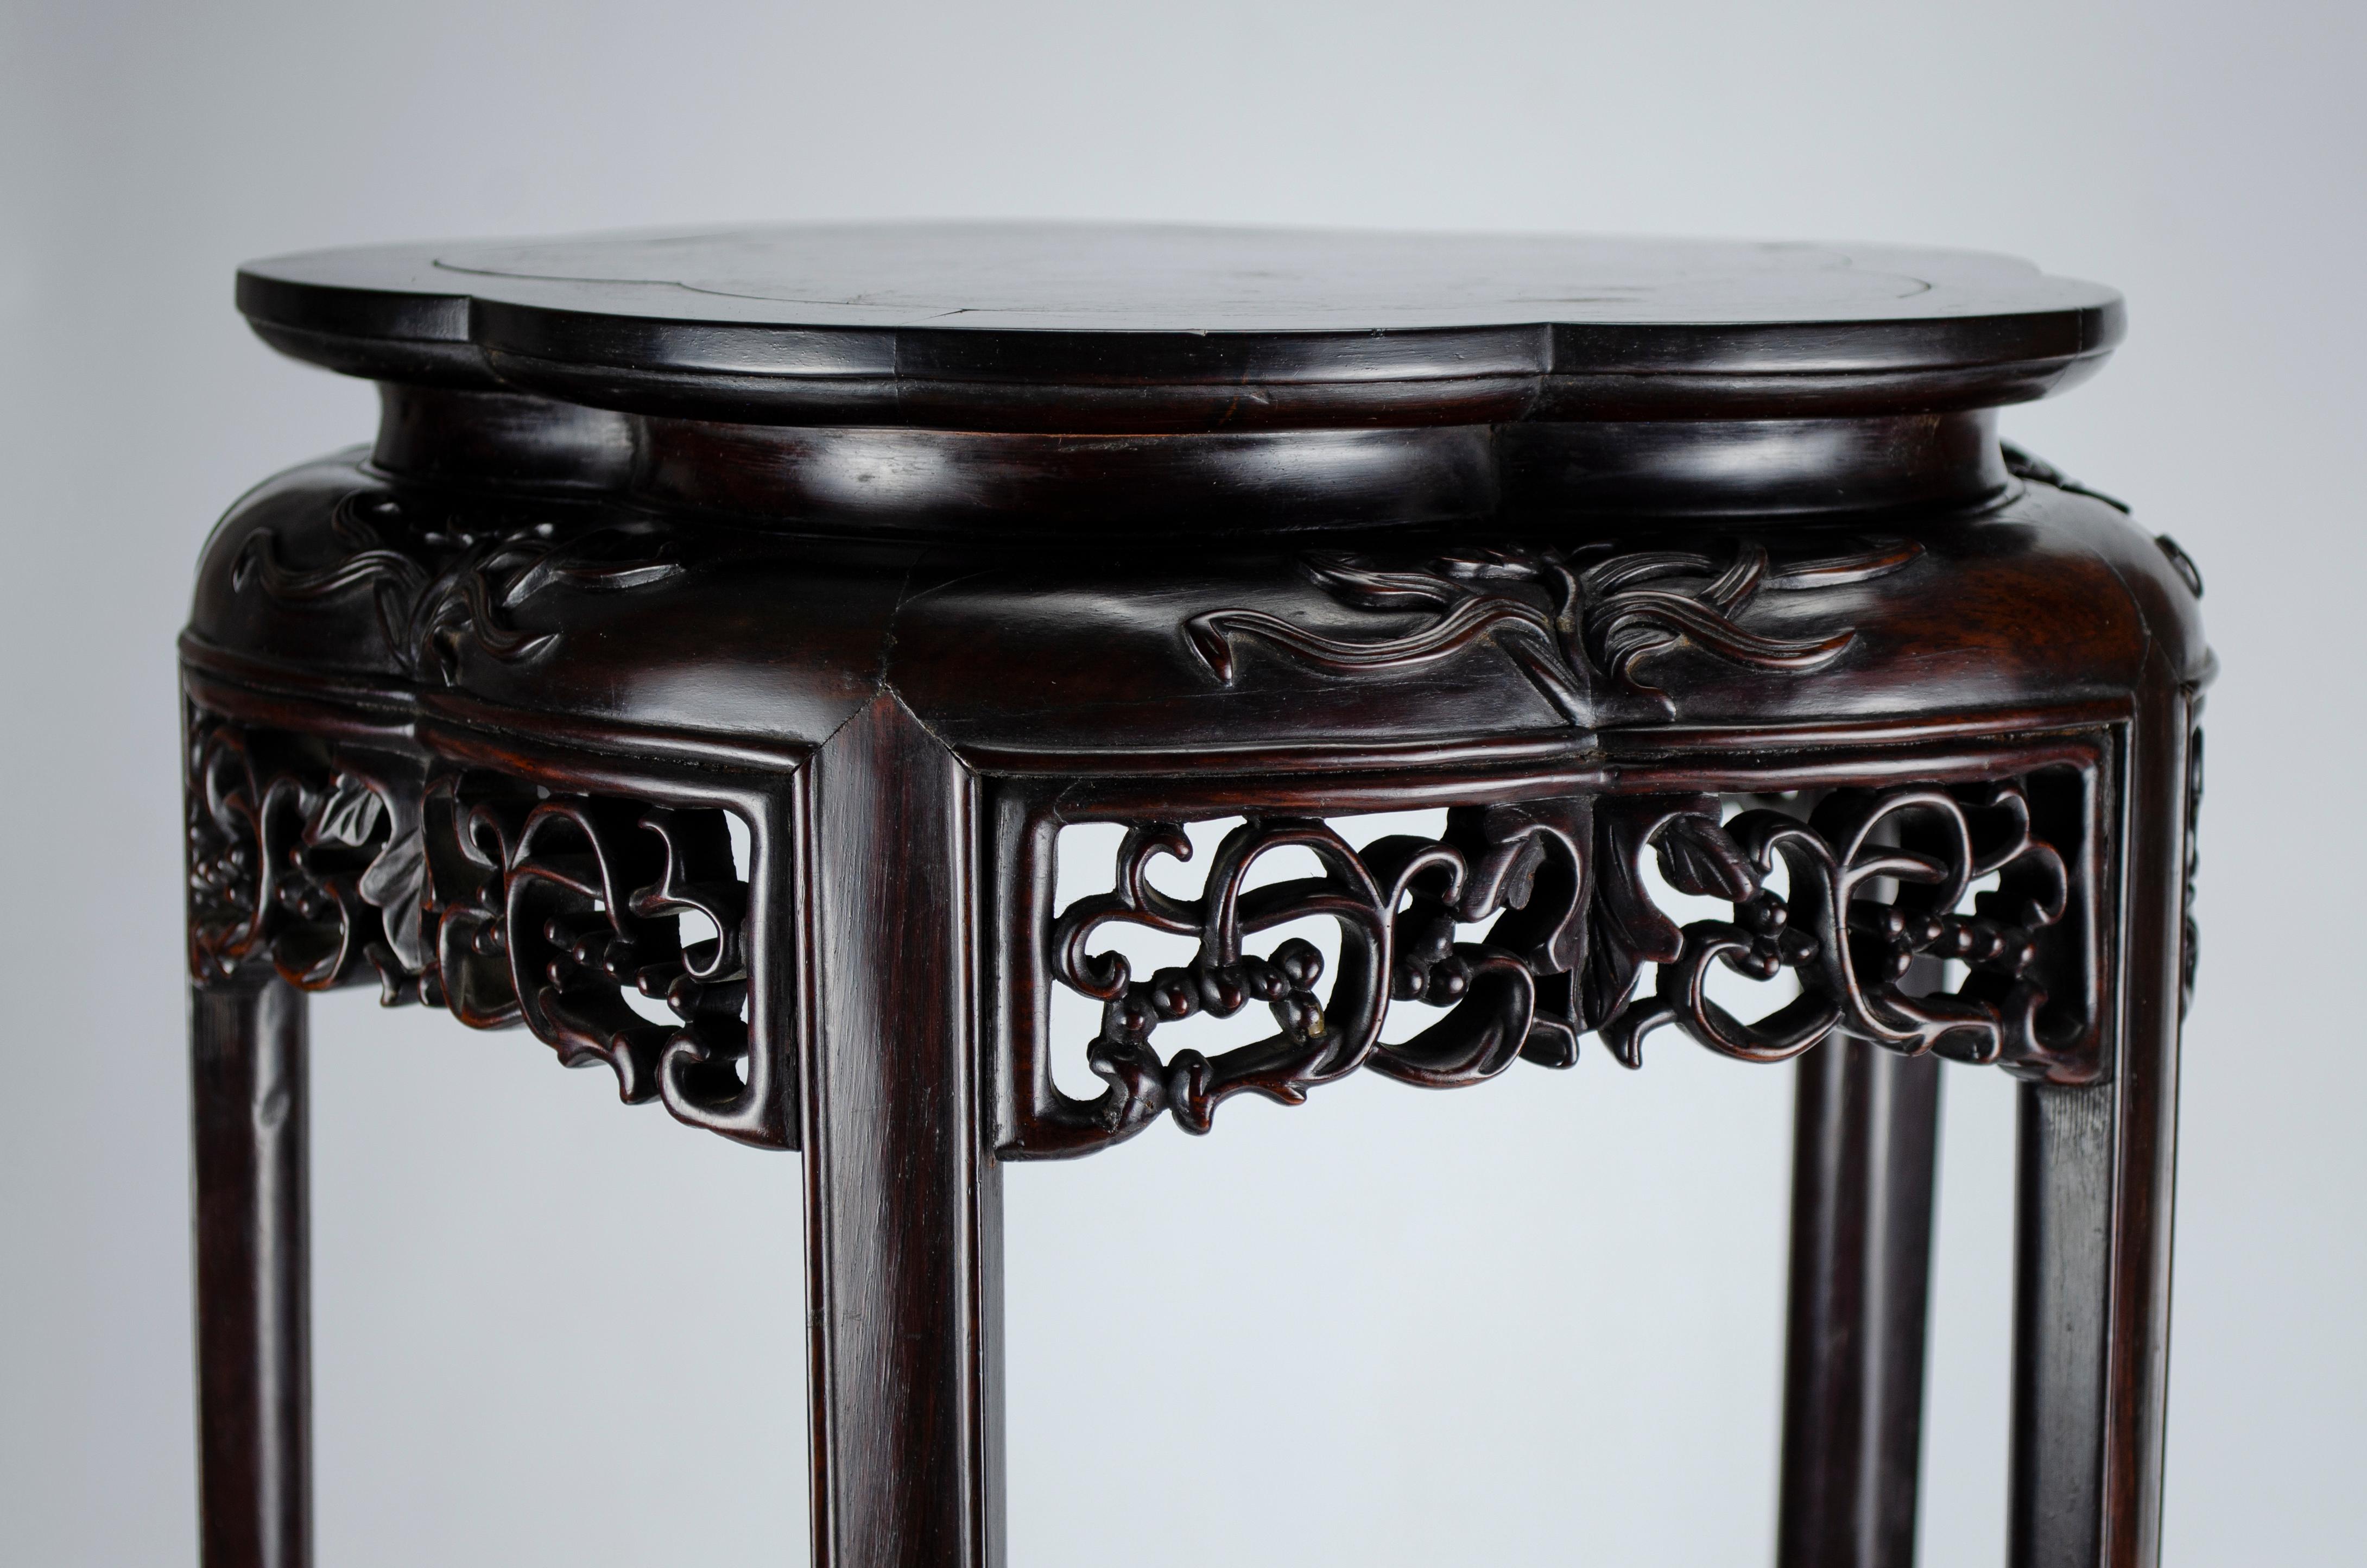 Huanghuali table
5-legged table
Origin China Circa 1800
Very good condition
Slightly inclined by the natural work of the wood (minimum)
Some small scratches
Top panel with 5 round ends
Supported by 5 arched legs and the lower part and the upper part